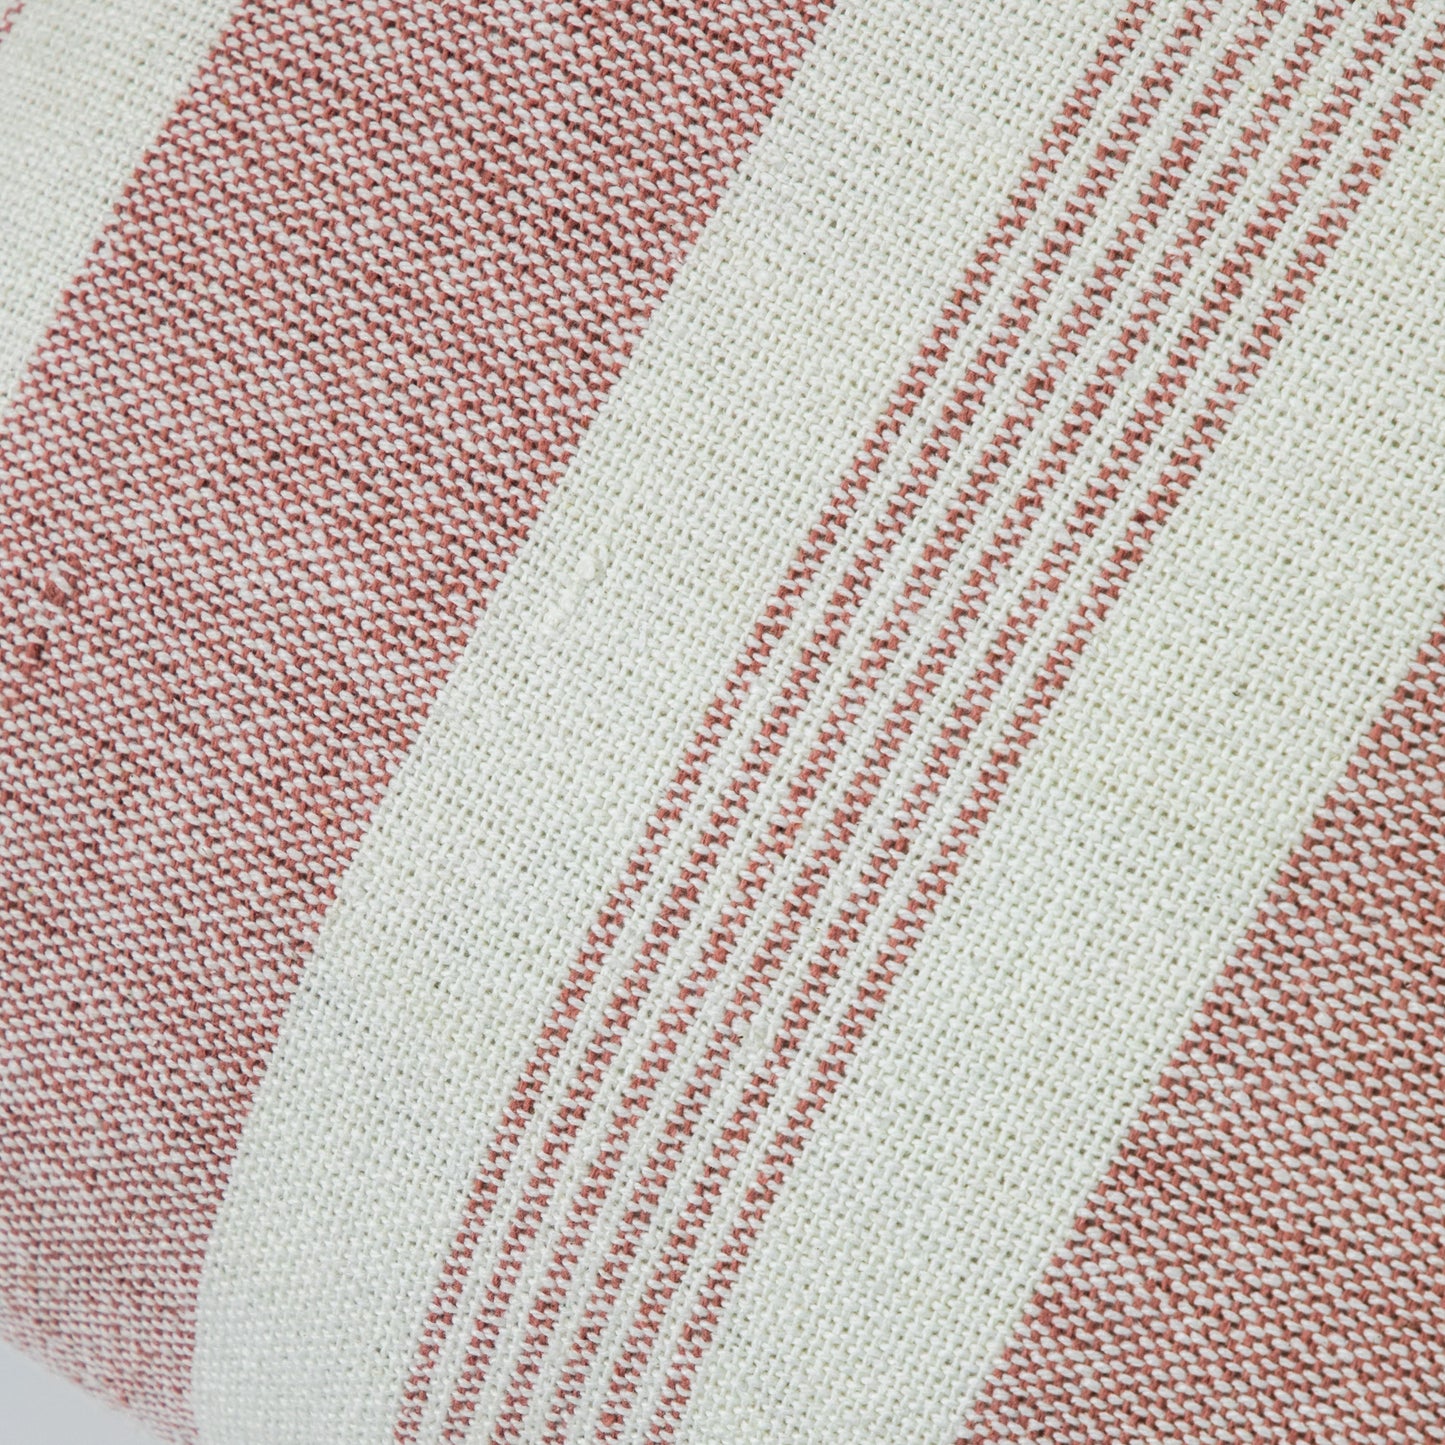 Load image into Gallery viewer, A close up of a Simply Organic Str Cushion Blush 550x550mm pillow, a home furniture item for interior decor from Kikiathome.co.uk.
